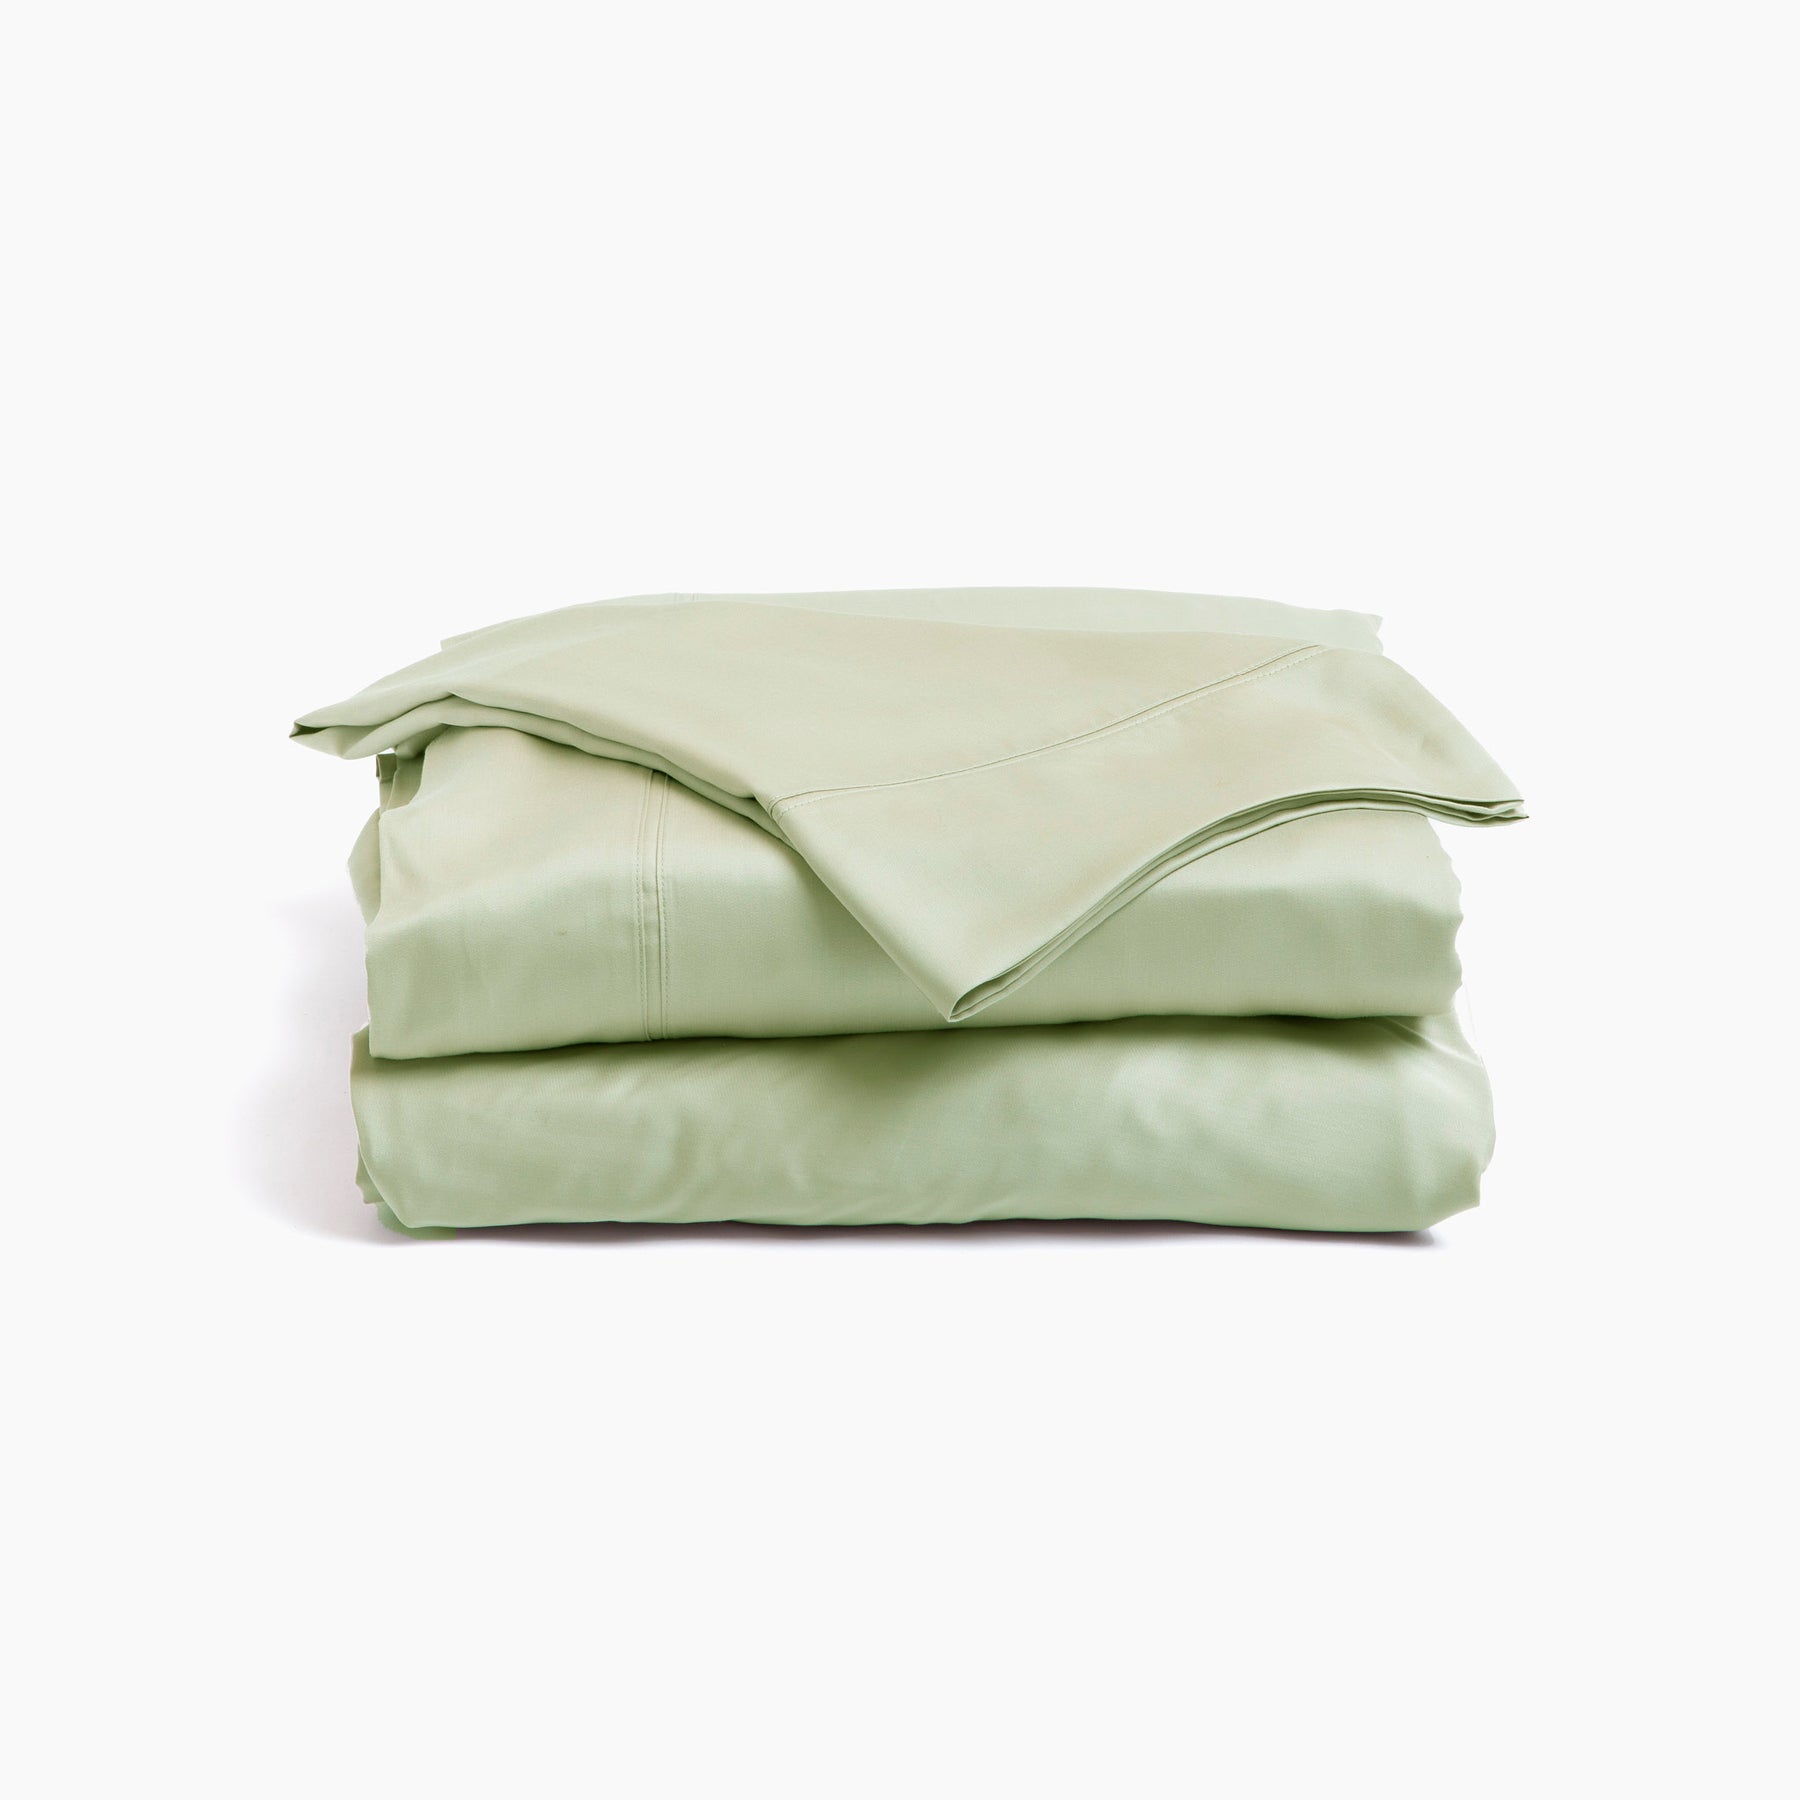 Image showcasing entire Sage Recovery Viscose Sheet Set all neatly folded on top of one another with a white background. The image shows (from top to bottom): pillowcase, flat sheet, fitted sheet